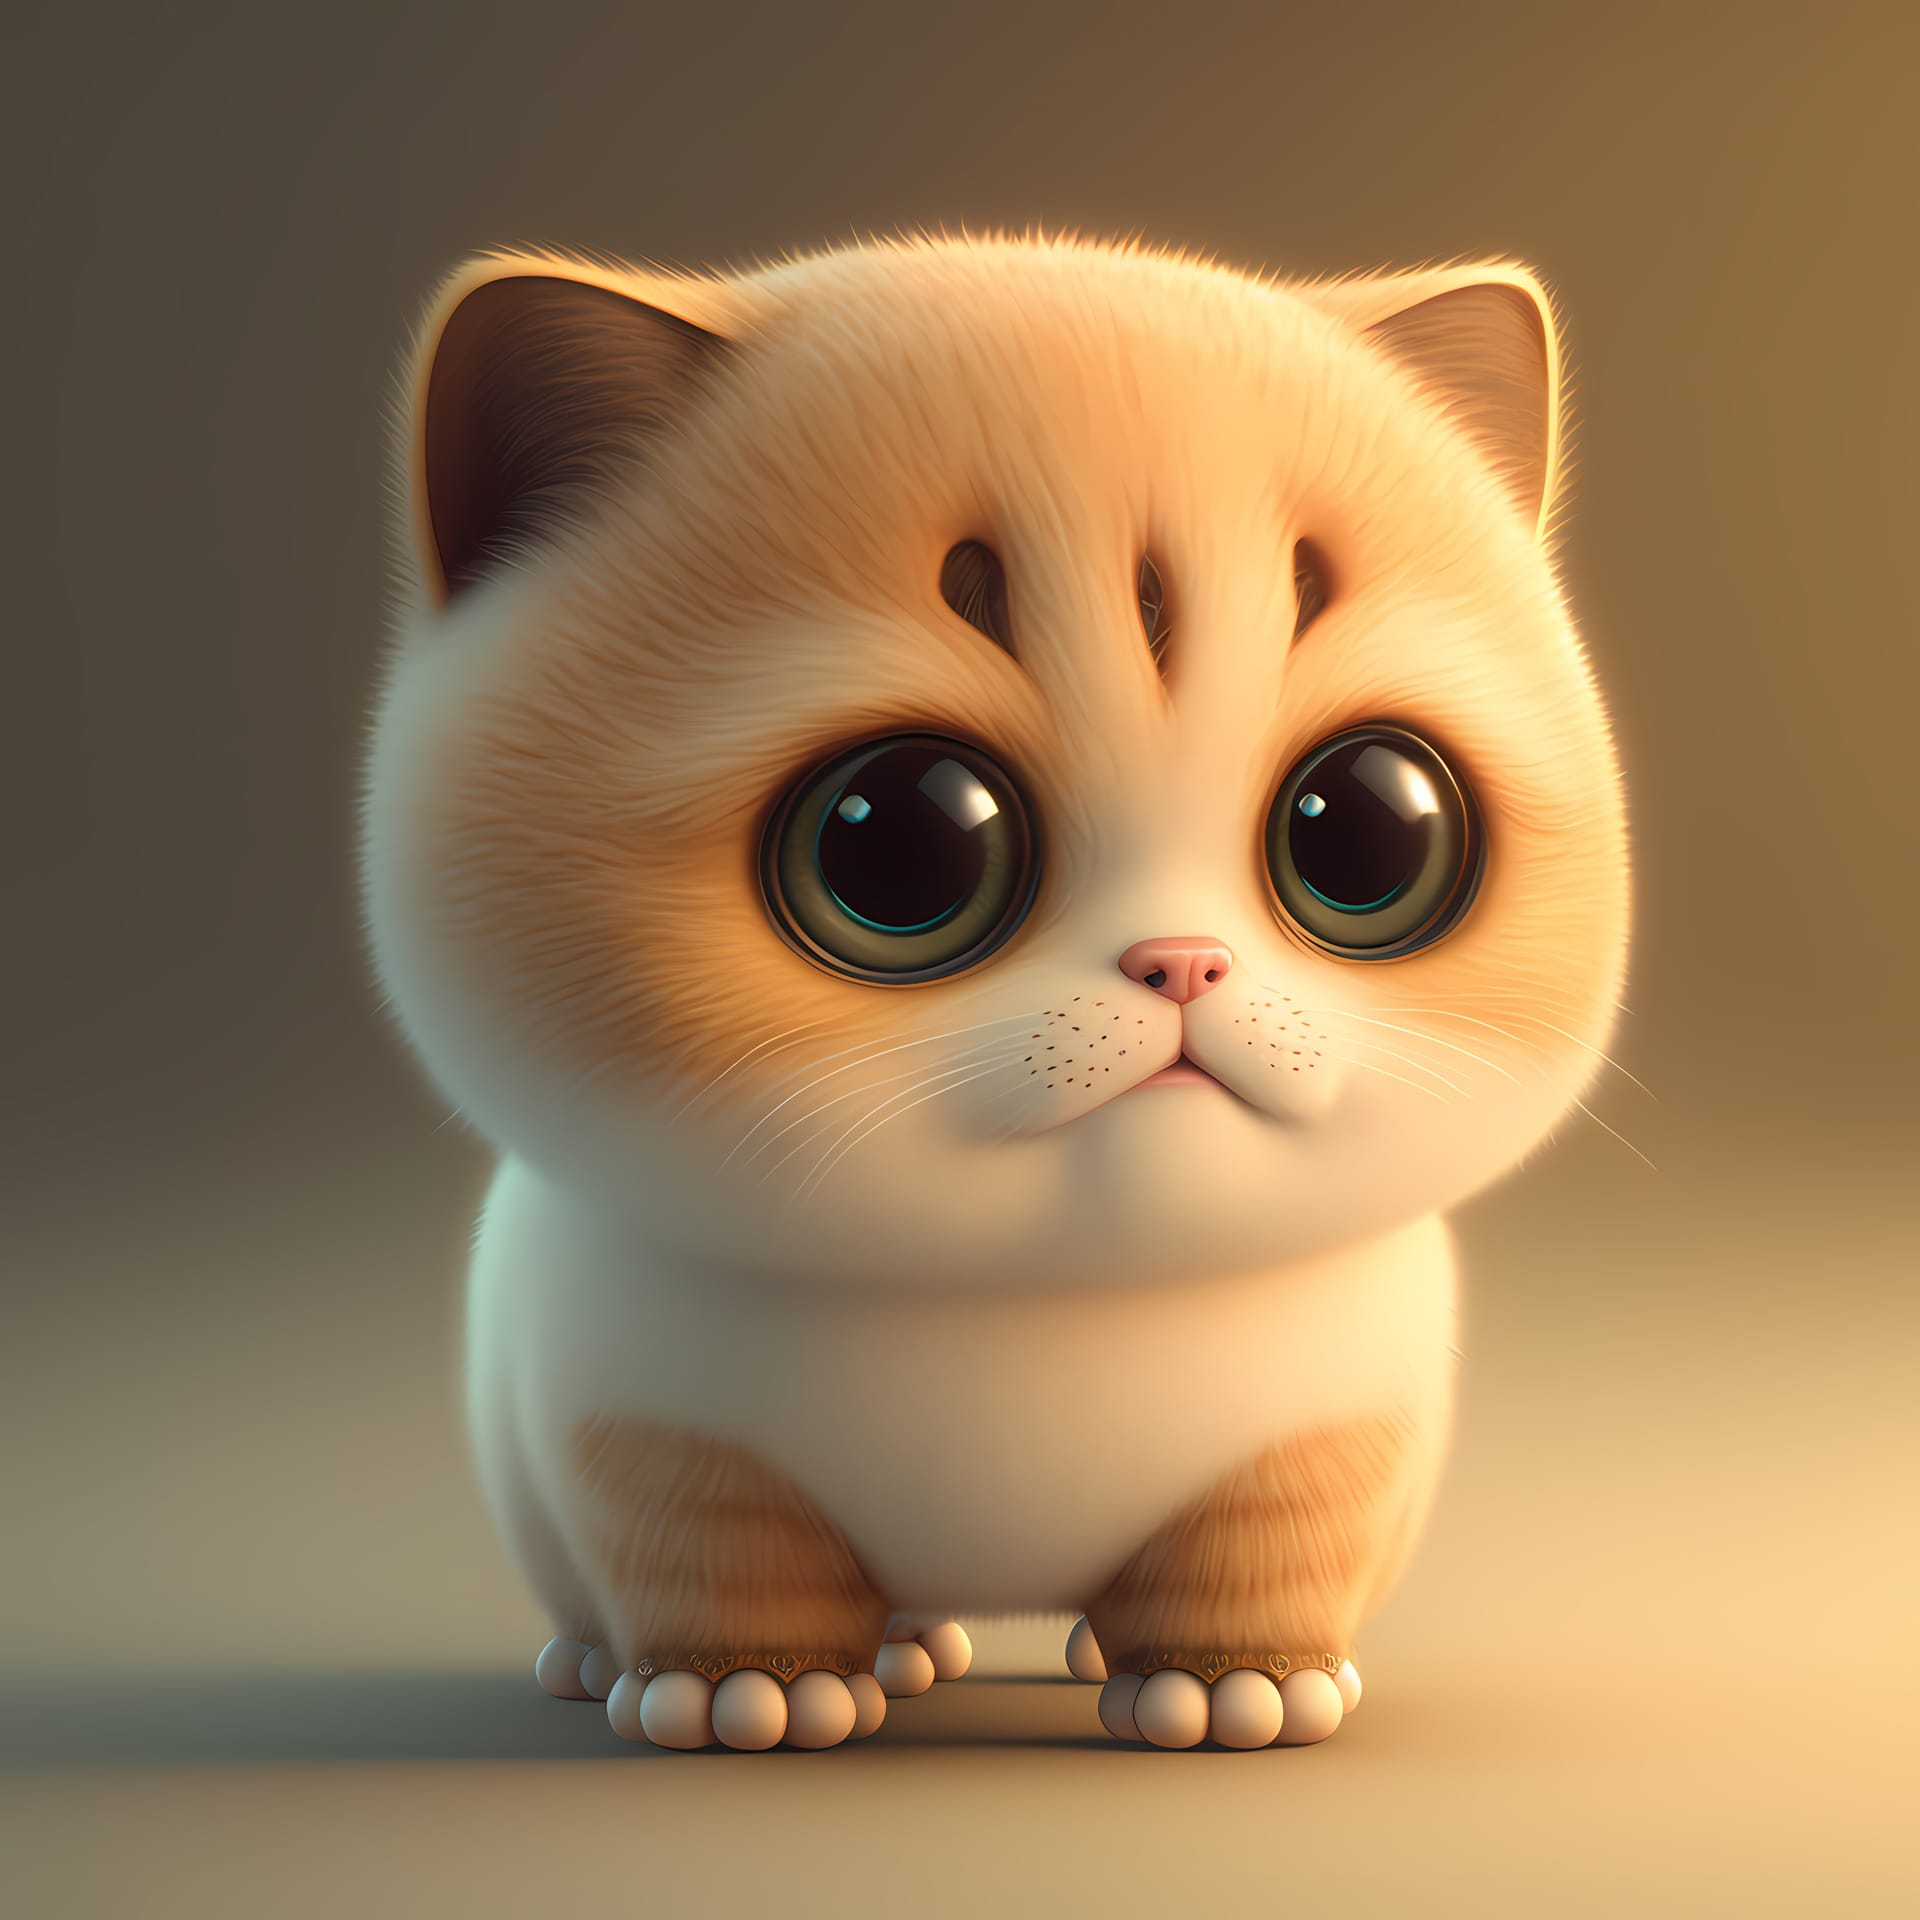 Adorable cute chubby cat 3d render evocative image